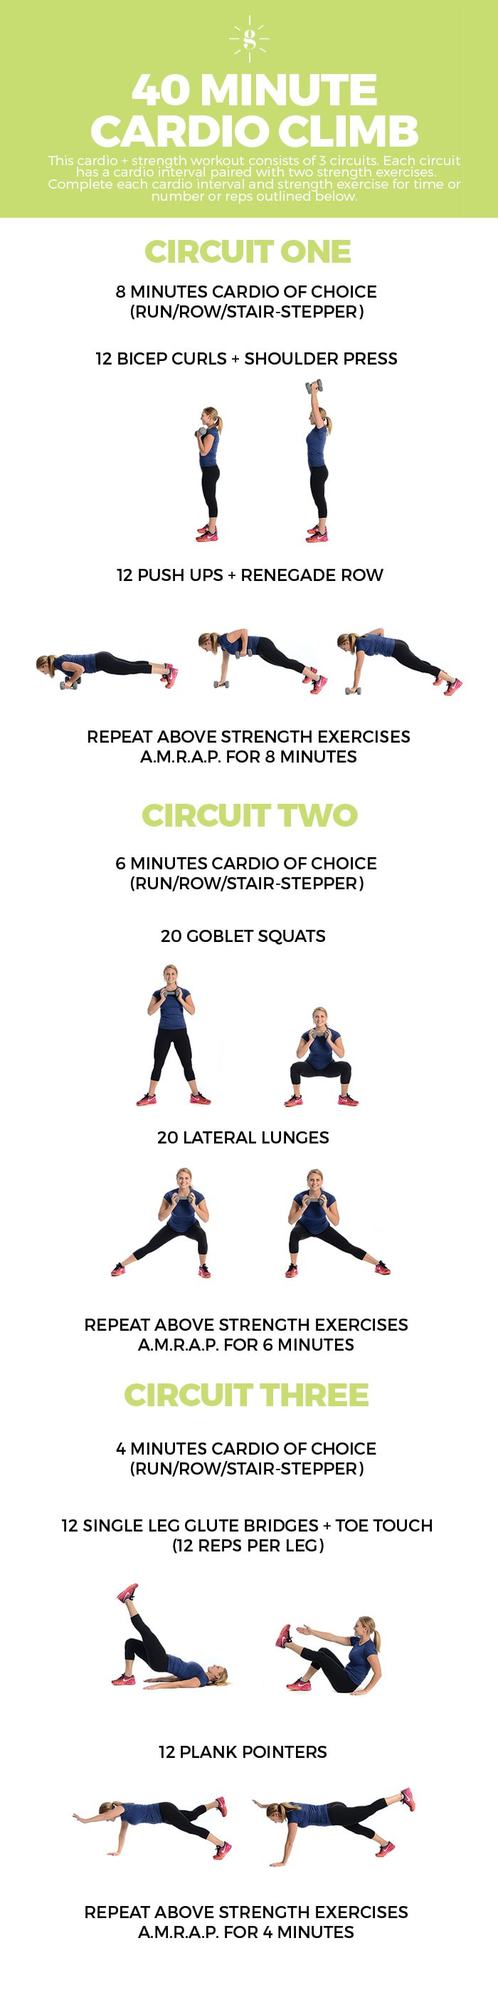 Do this 40 minute cardio climb workout and mix steady state cardio with strength training AMRAP circuits!